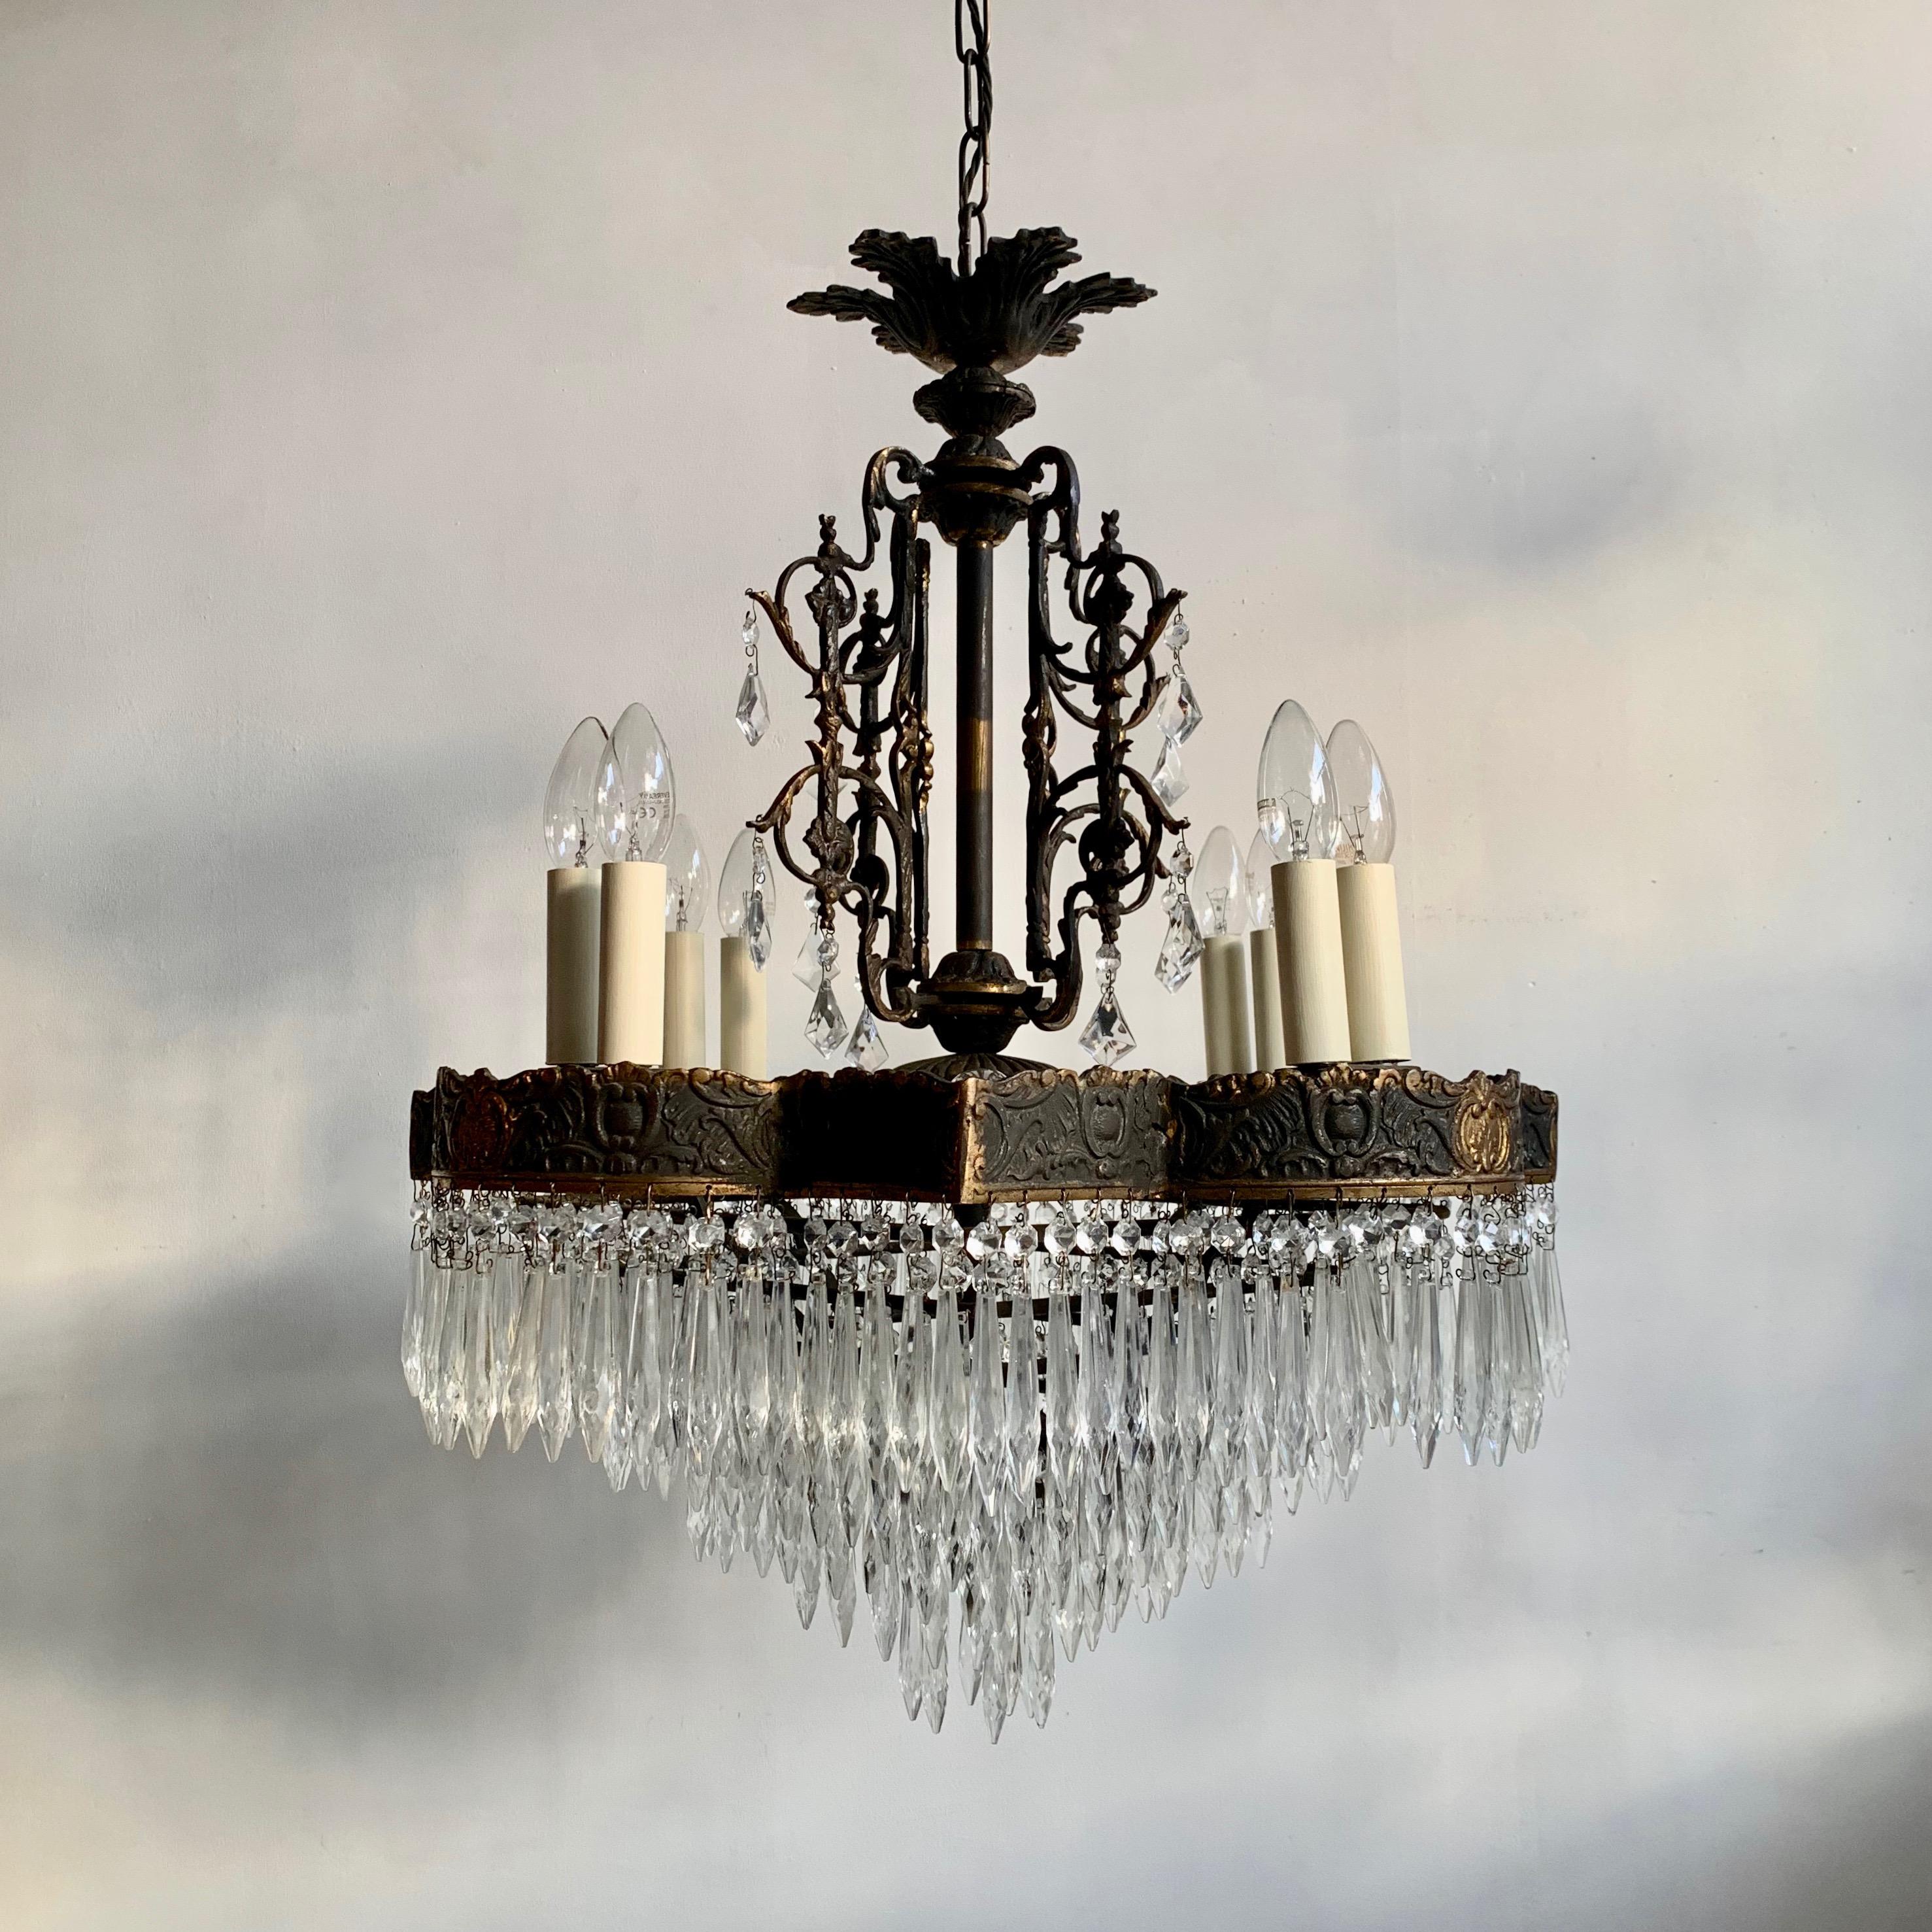 Large French Square French Tiered Waterfall Chandelier with Glass Icicle Drops 5